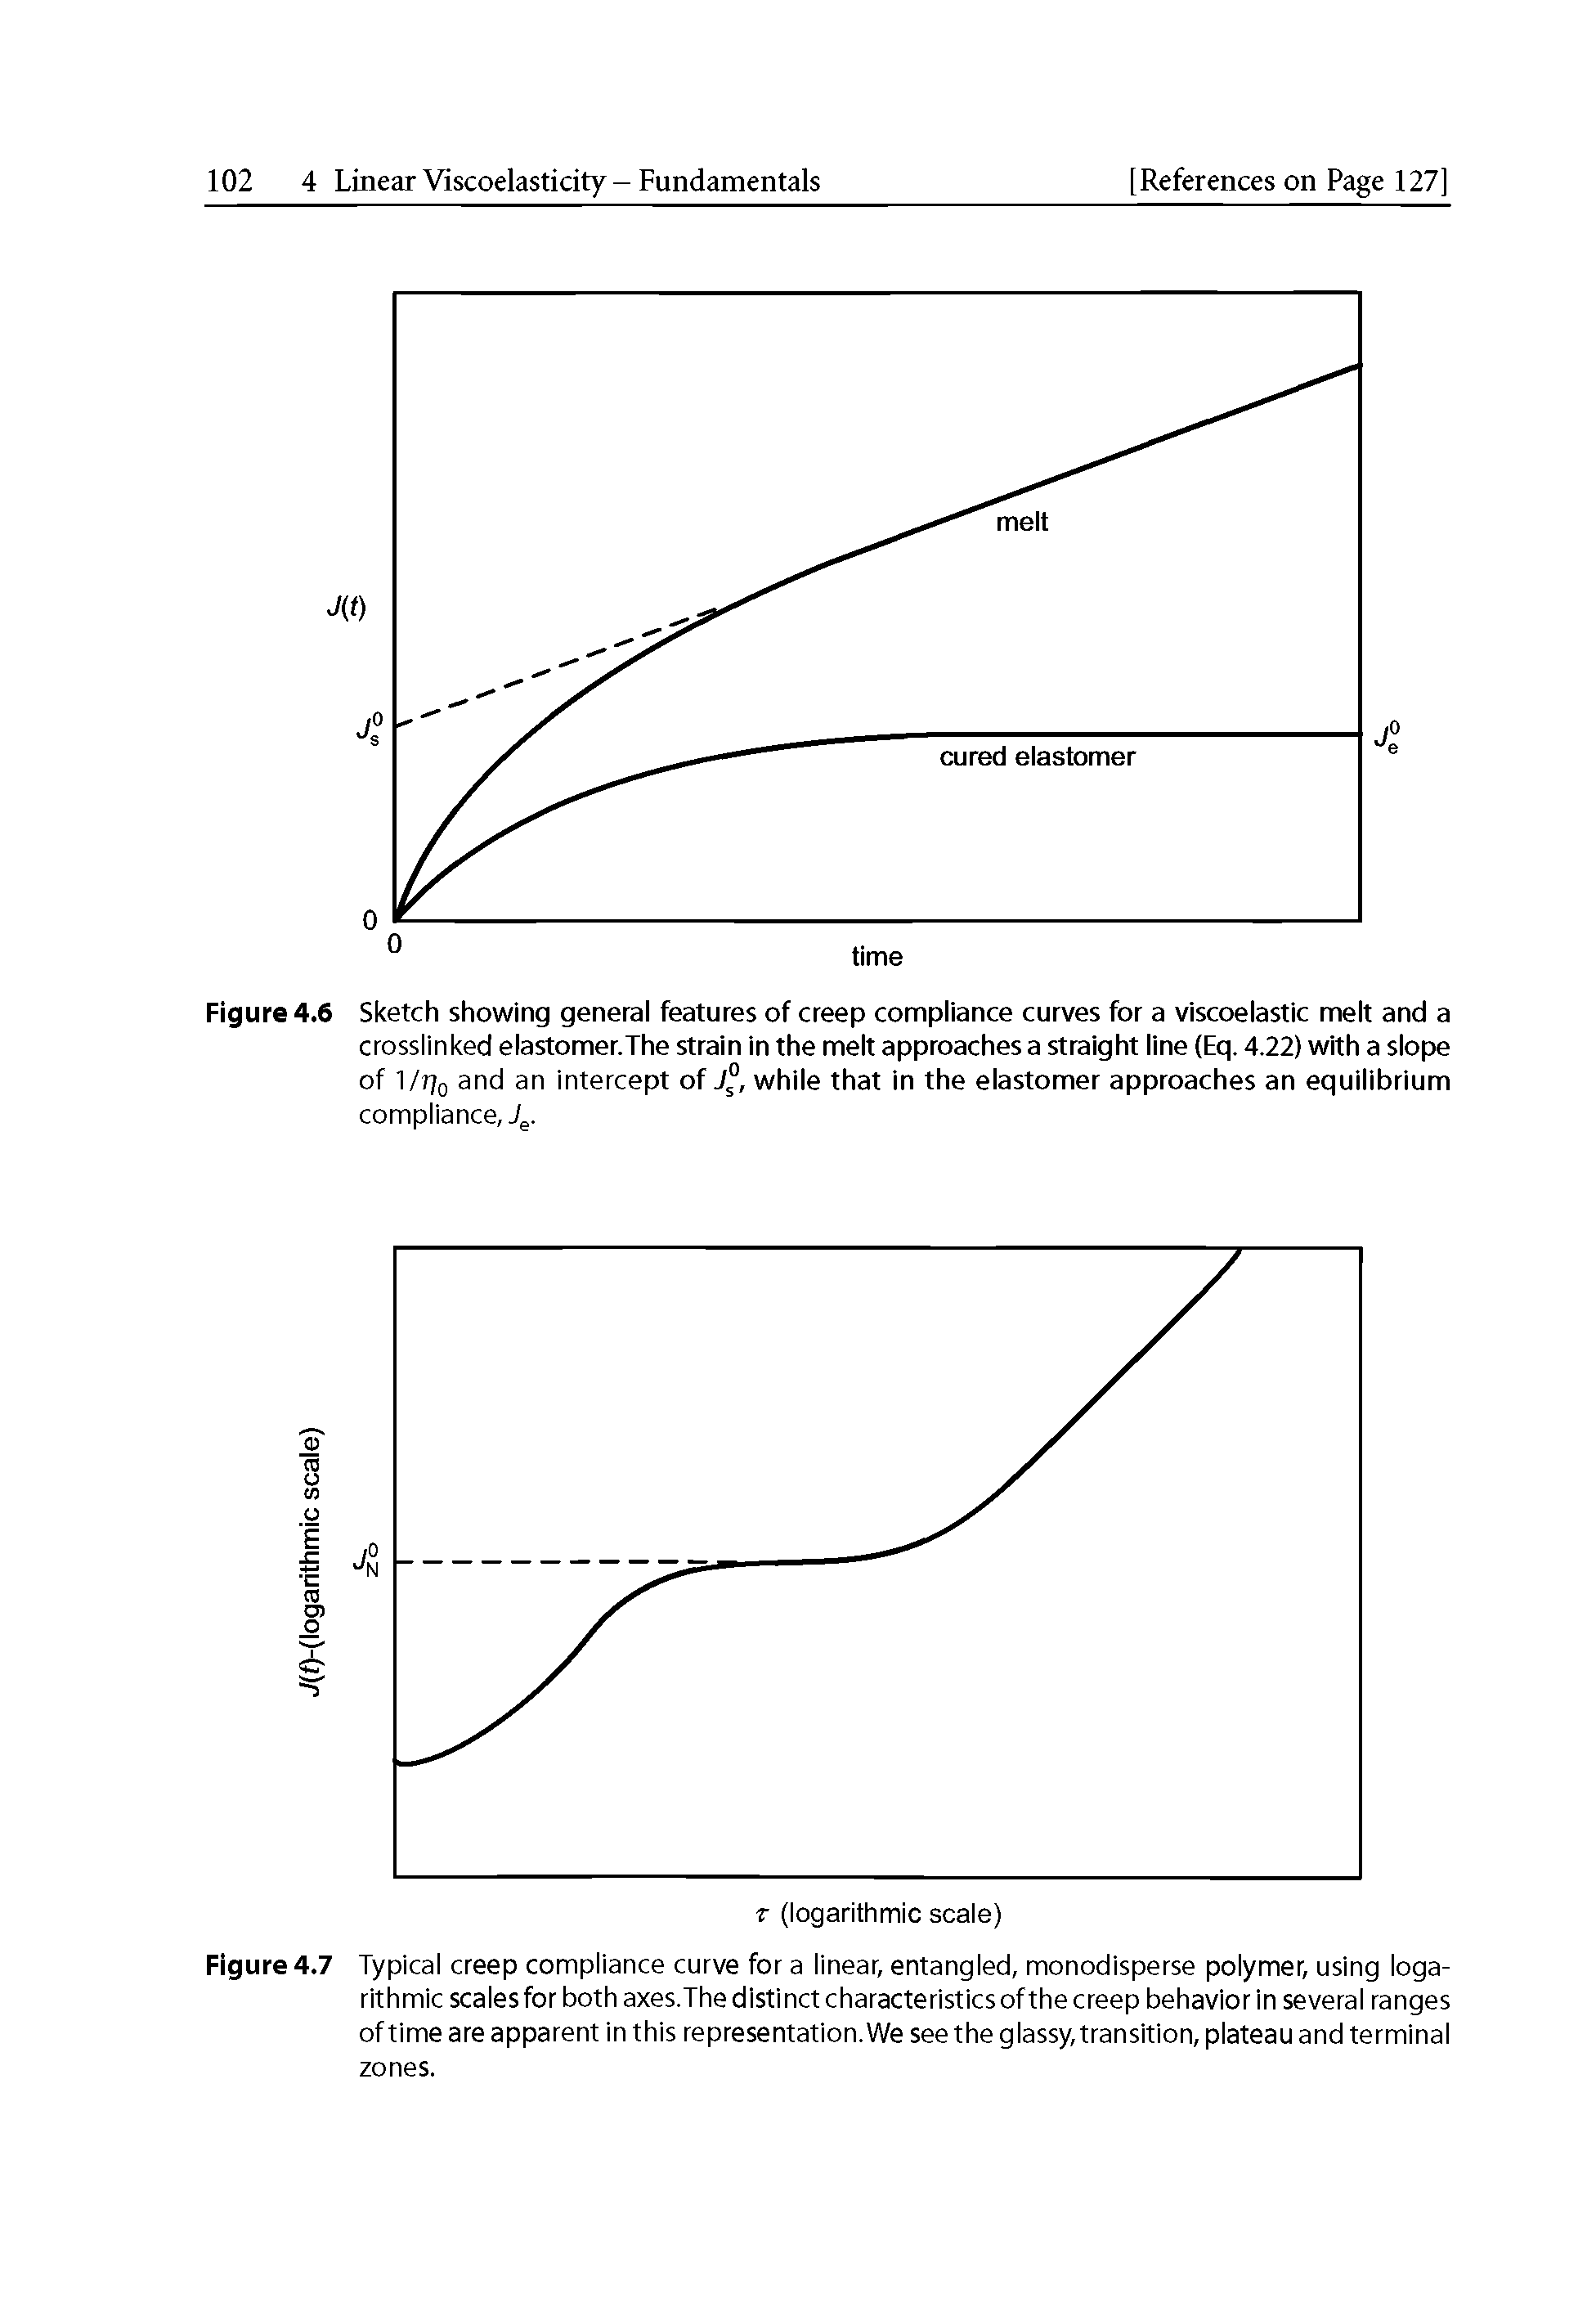 Figure 4.6 Sketch showing general features of creep compliance curves for a viscoelastic melt and a crosslinked elastomer.The strain in the melt approaches a straight line (Eg. 4.22) with a slope of 1/ 7o and an intercept of J°, while that in the elastomer approaches an equilibrium...